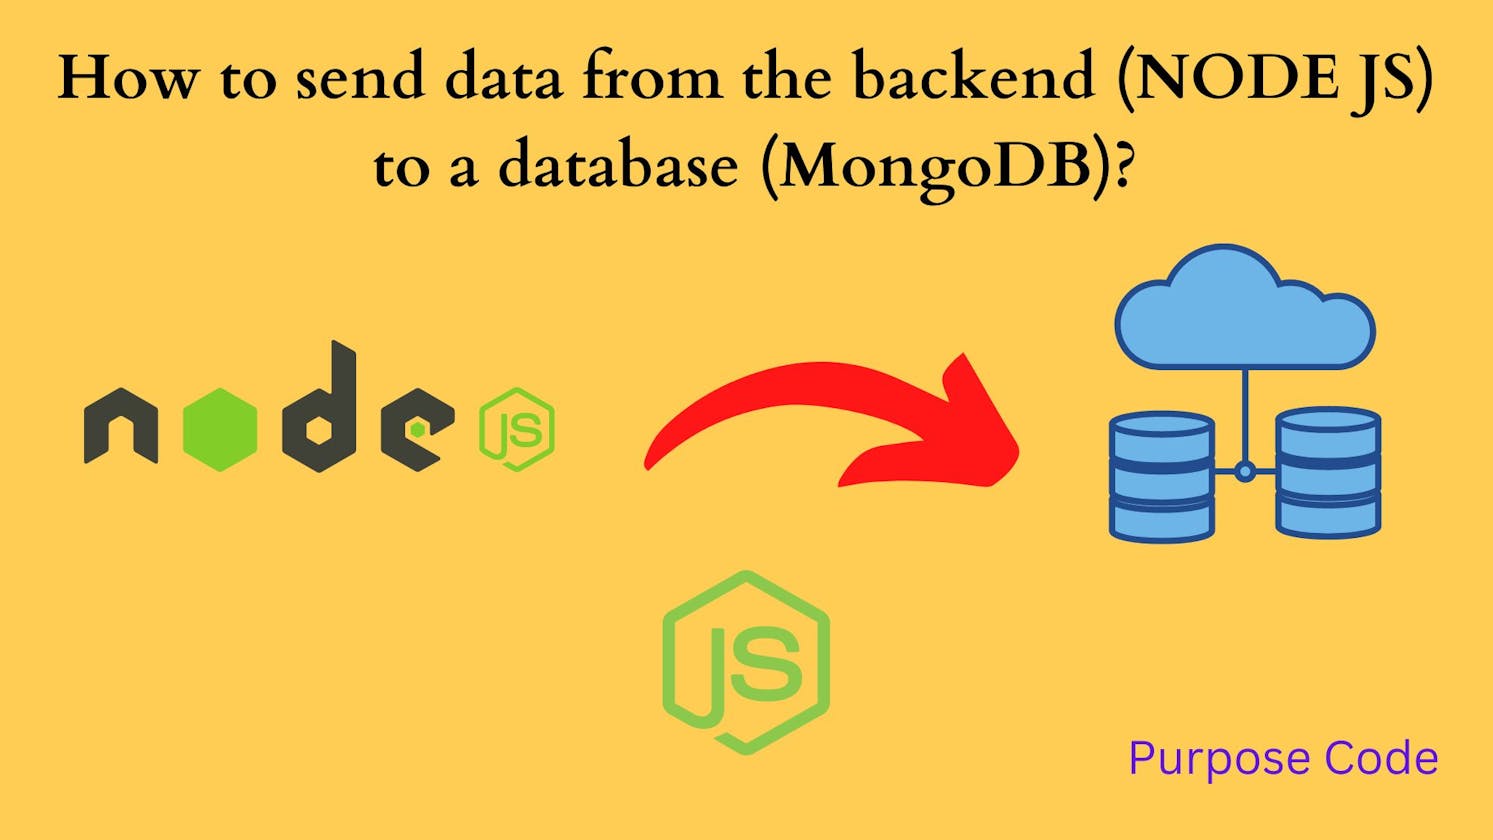 Send Data from backend (Node JS) to a database (MongoDB) and store it